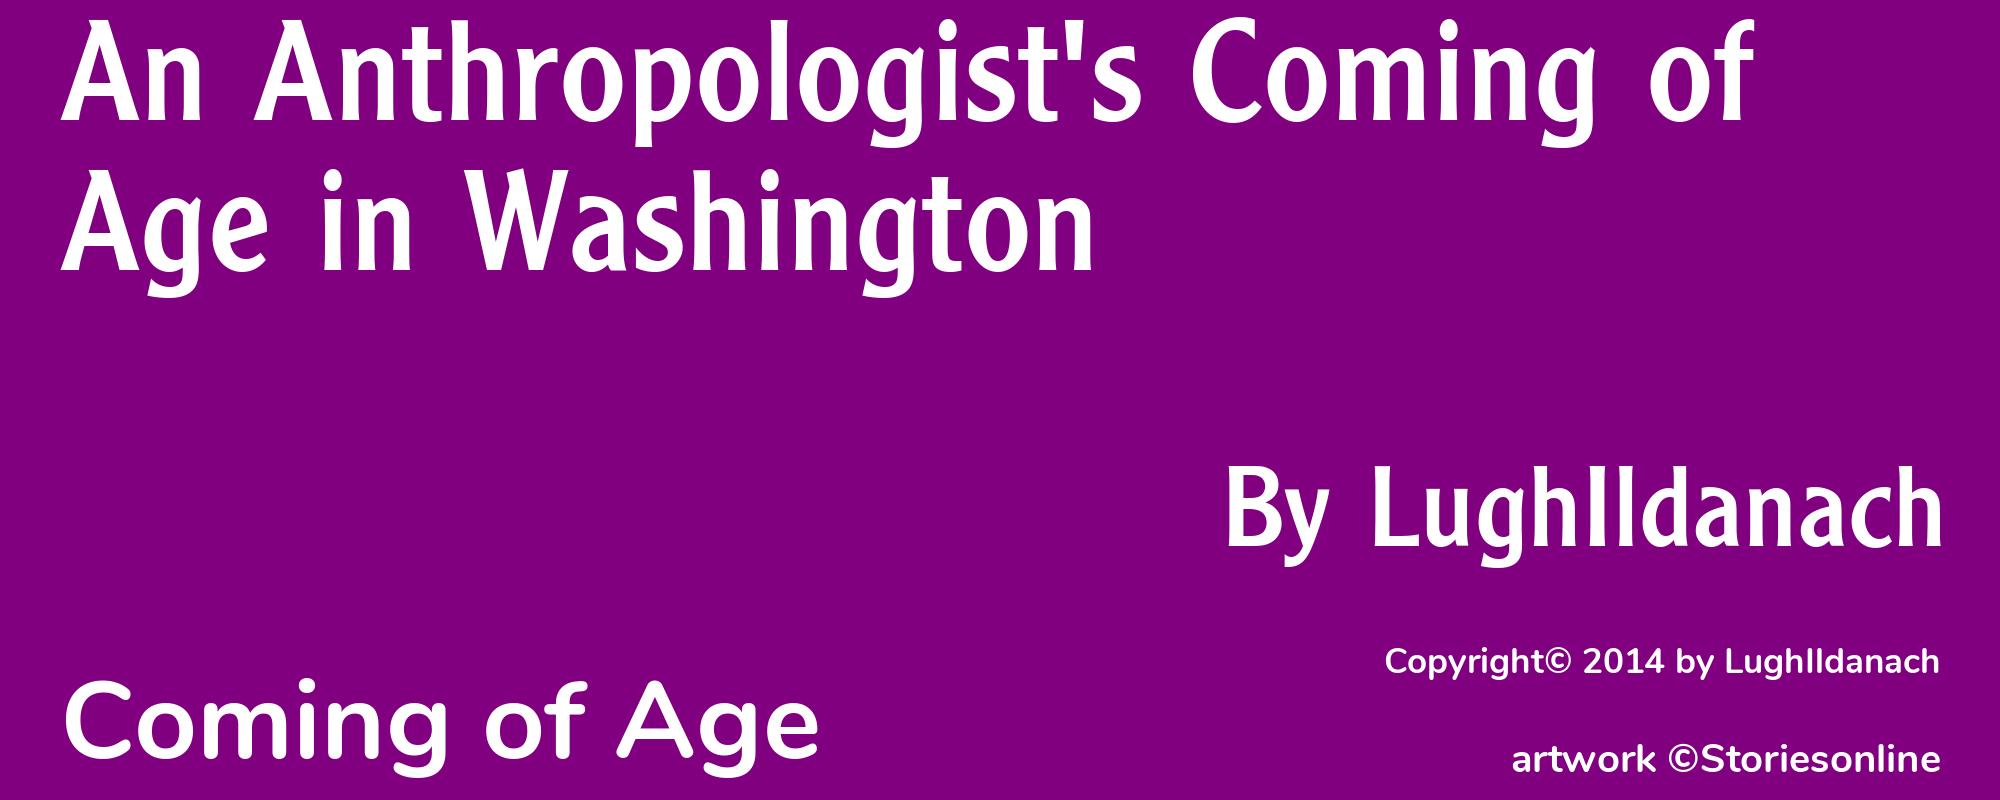 An Anthropologist's Coming of Age in Washington - Cover